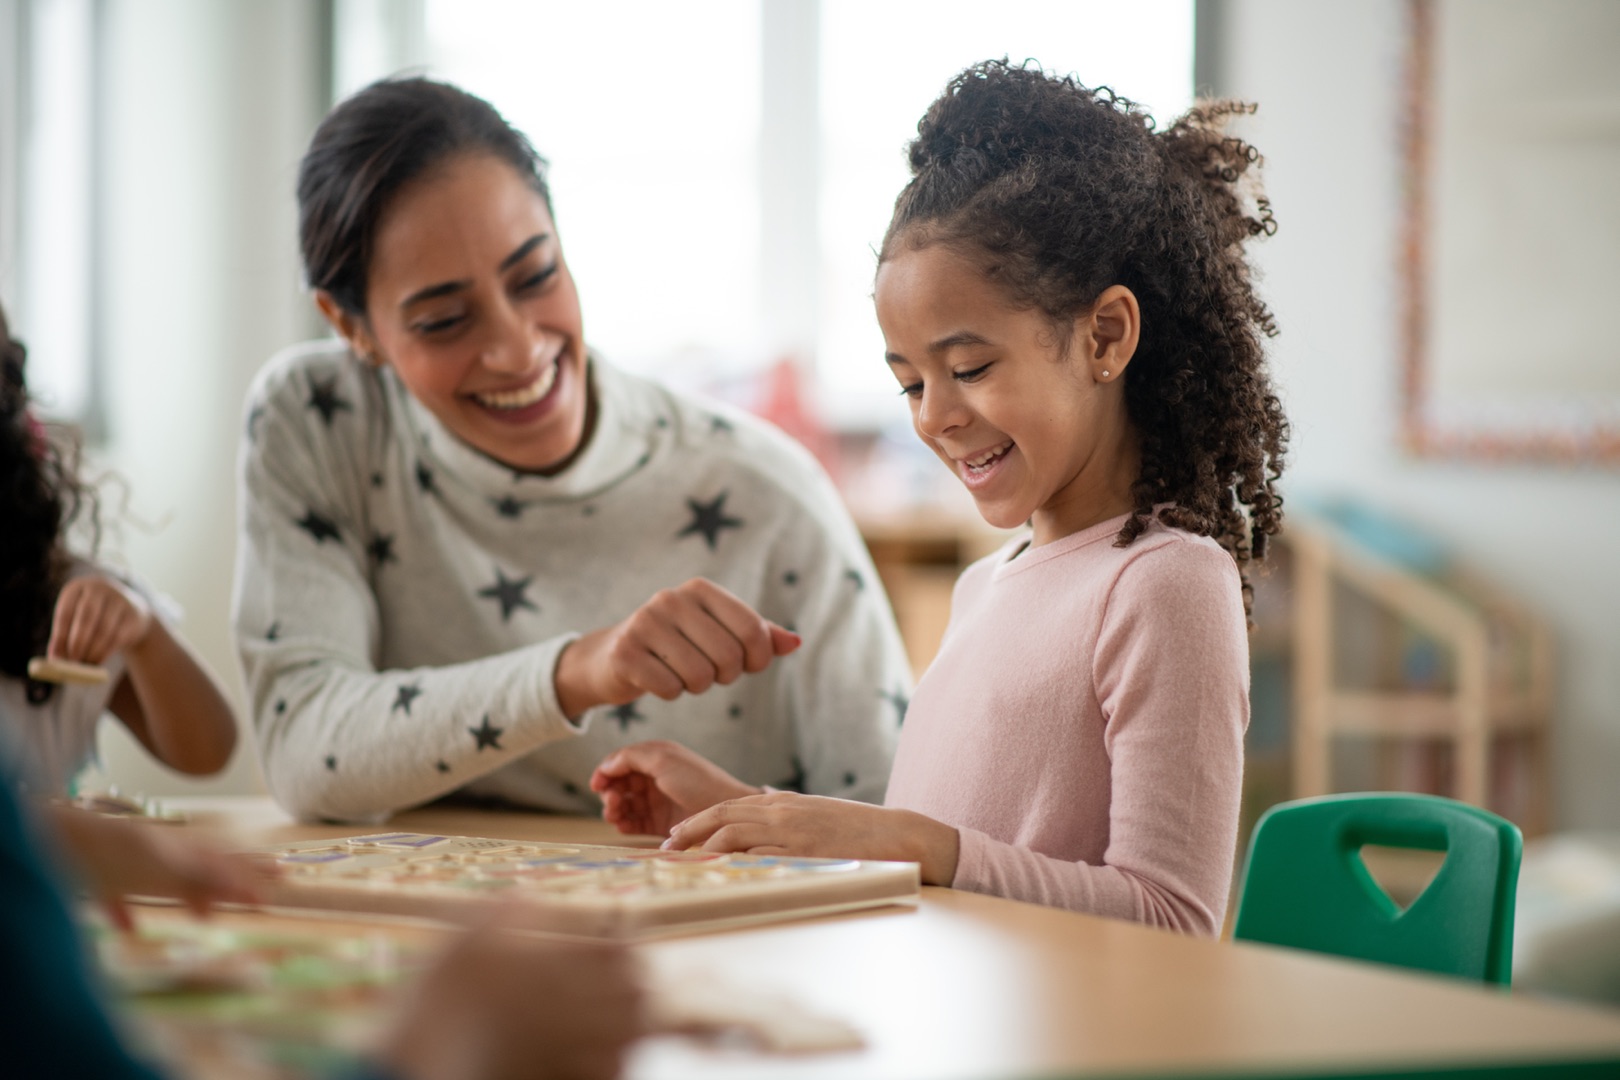 A young female daycare teacher of Indian decent, sits beside a sweet, curly-hired young girl as they look at the completed puzzle they cooperatively finished. They are each dressed casually, smiling and laughing as they sit back and enjoy looking at their finished work.